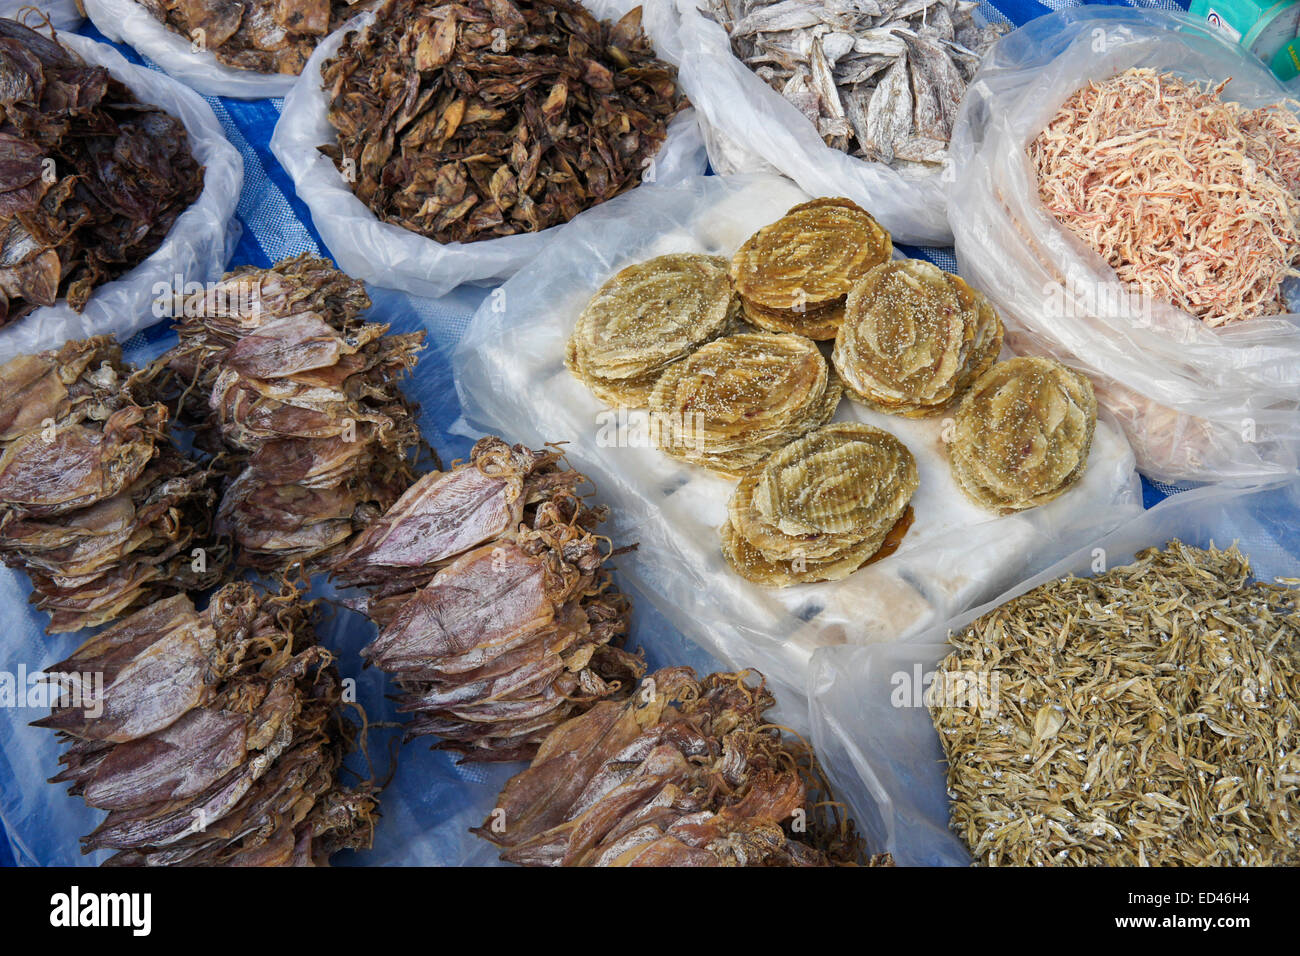 Dried fish and seafood for sale in market, Laos Stock Photo